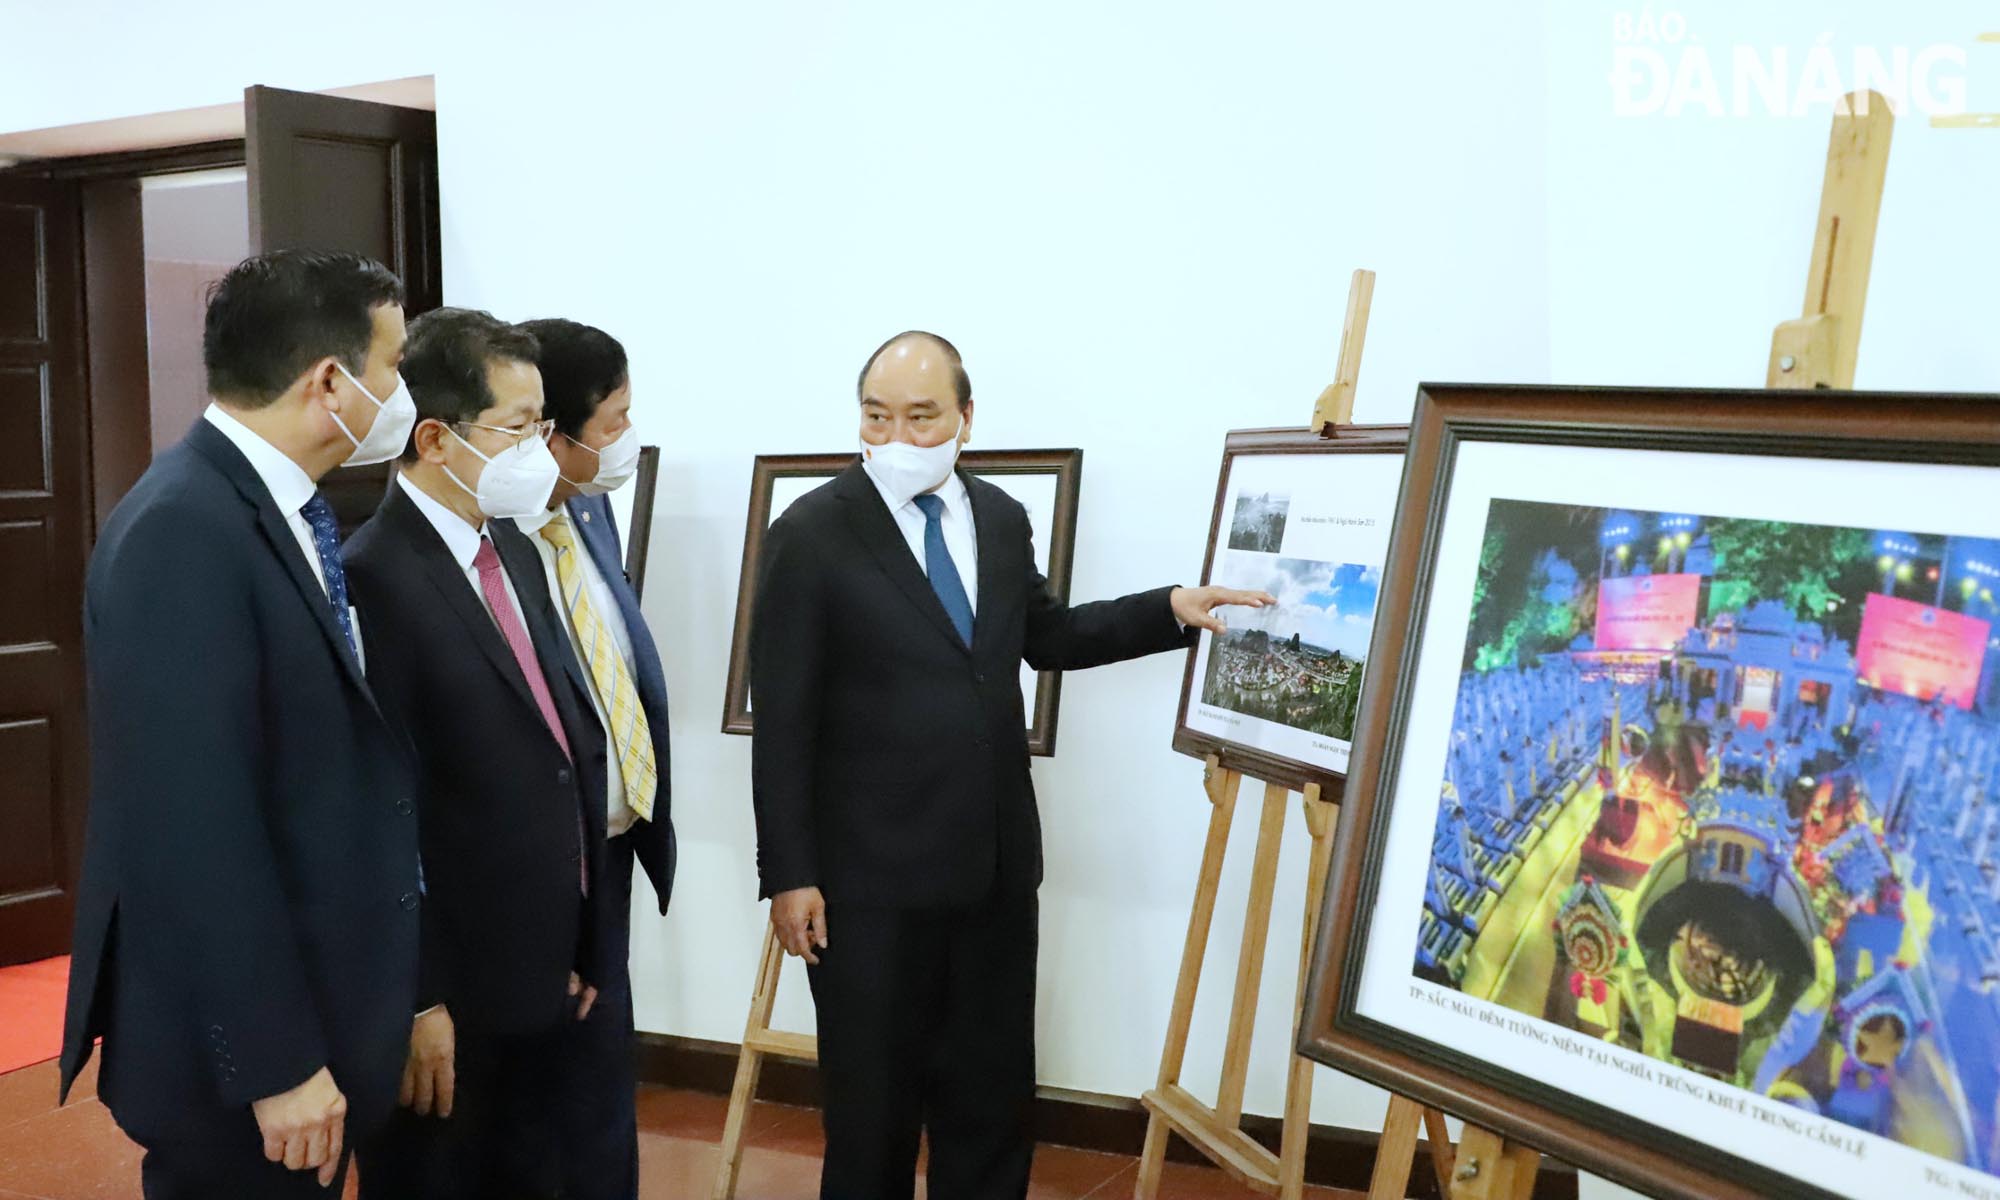  State President Nguyen Xuan Phuc (right) and key Da Nang leaders visit an exhibition highlighting Da Nang’s achievements recorded over the past 25 years. Photo: NGOC PHU